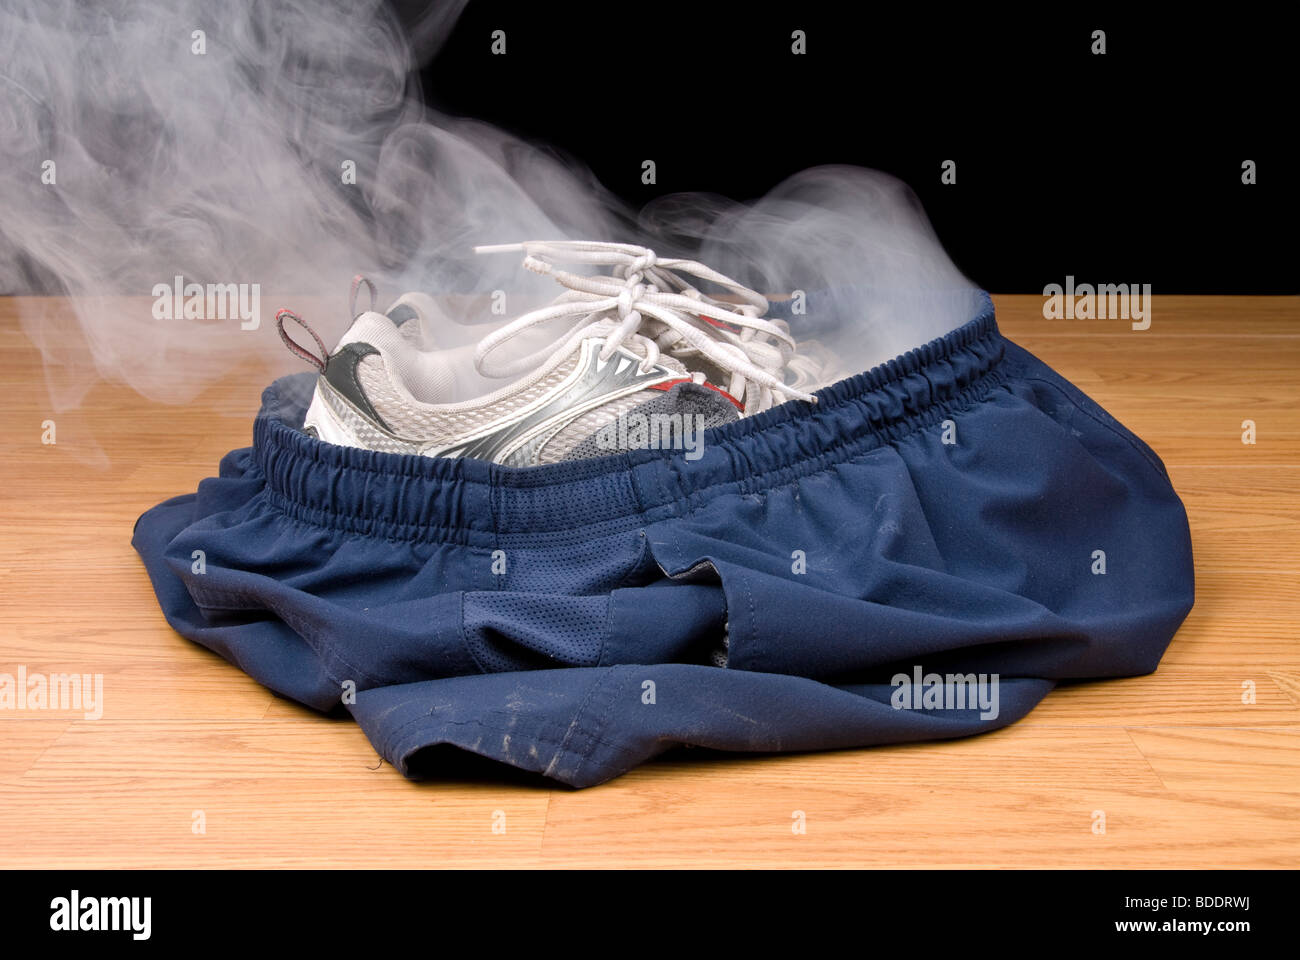 A pair of smoking shoes and shorts remain as the illusion insinuates that a person has vanished right out of their clothing. Stock Photo